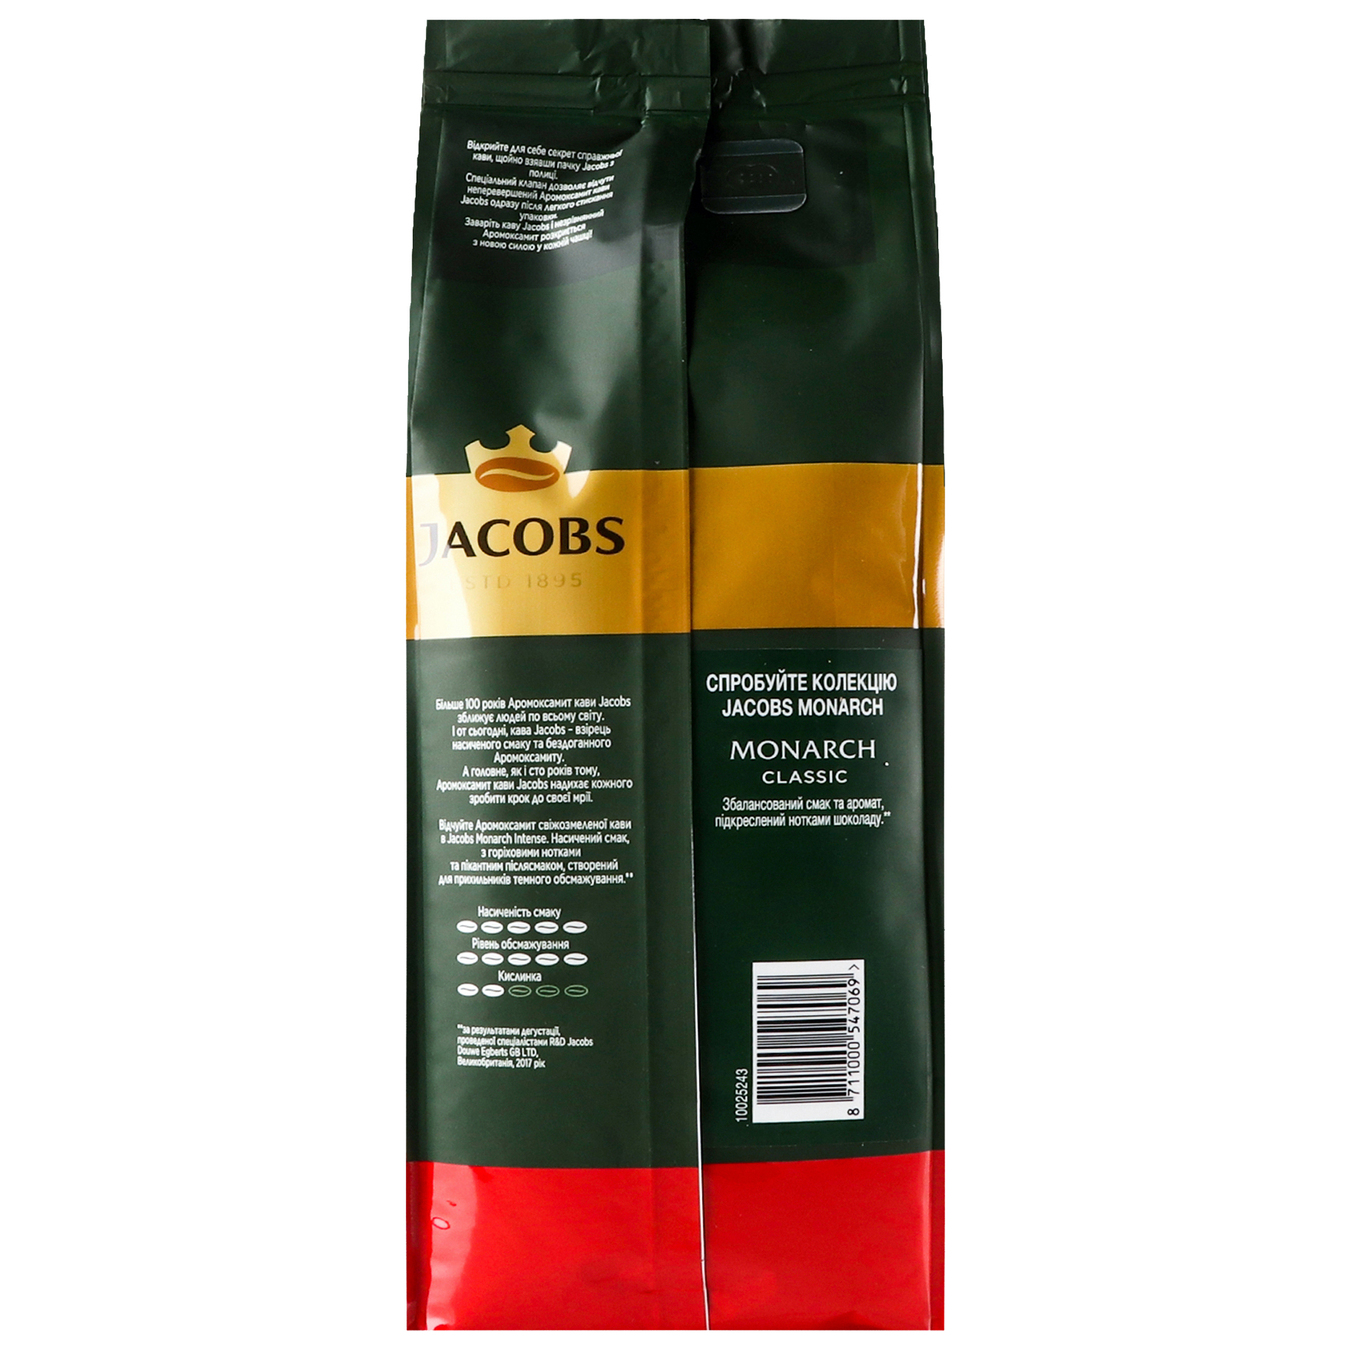 JACOBS MONARCH INTENSE natural roasted ground coffee 400g 3